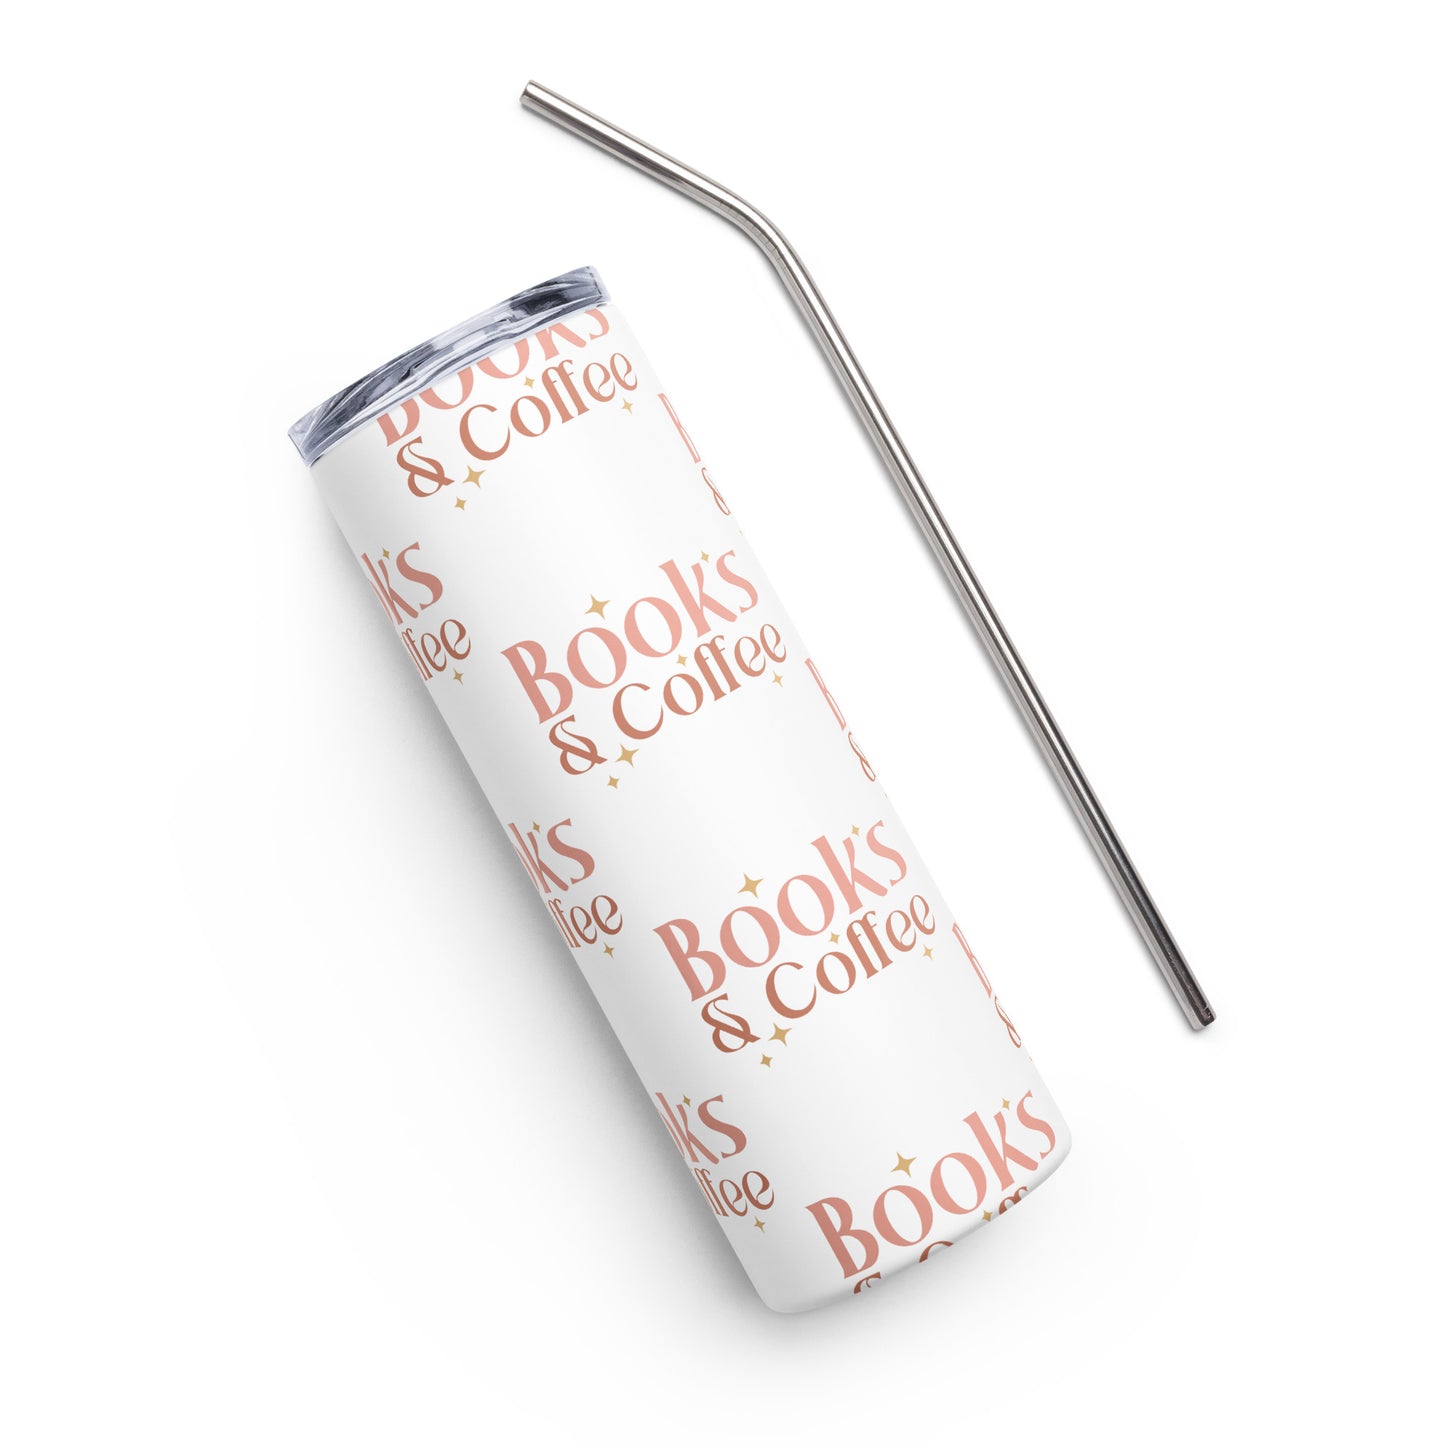 Books & Coffee Stainless steel tumbler